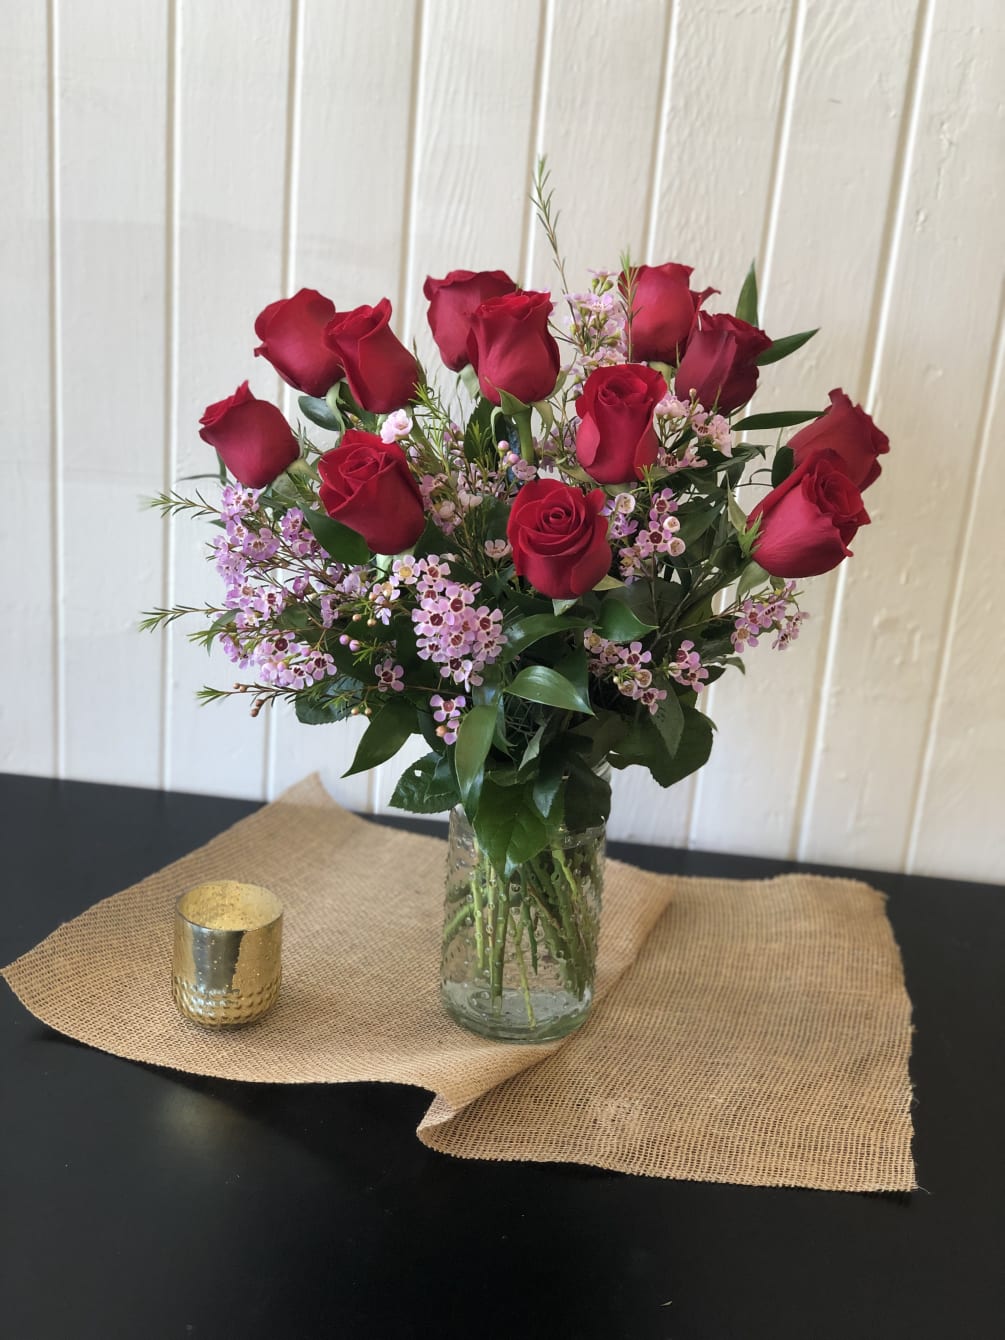 Red roses are arranged with accent flowers and greens in a clear